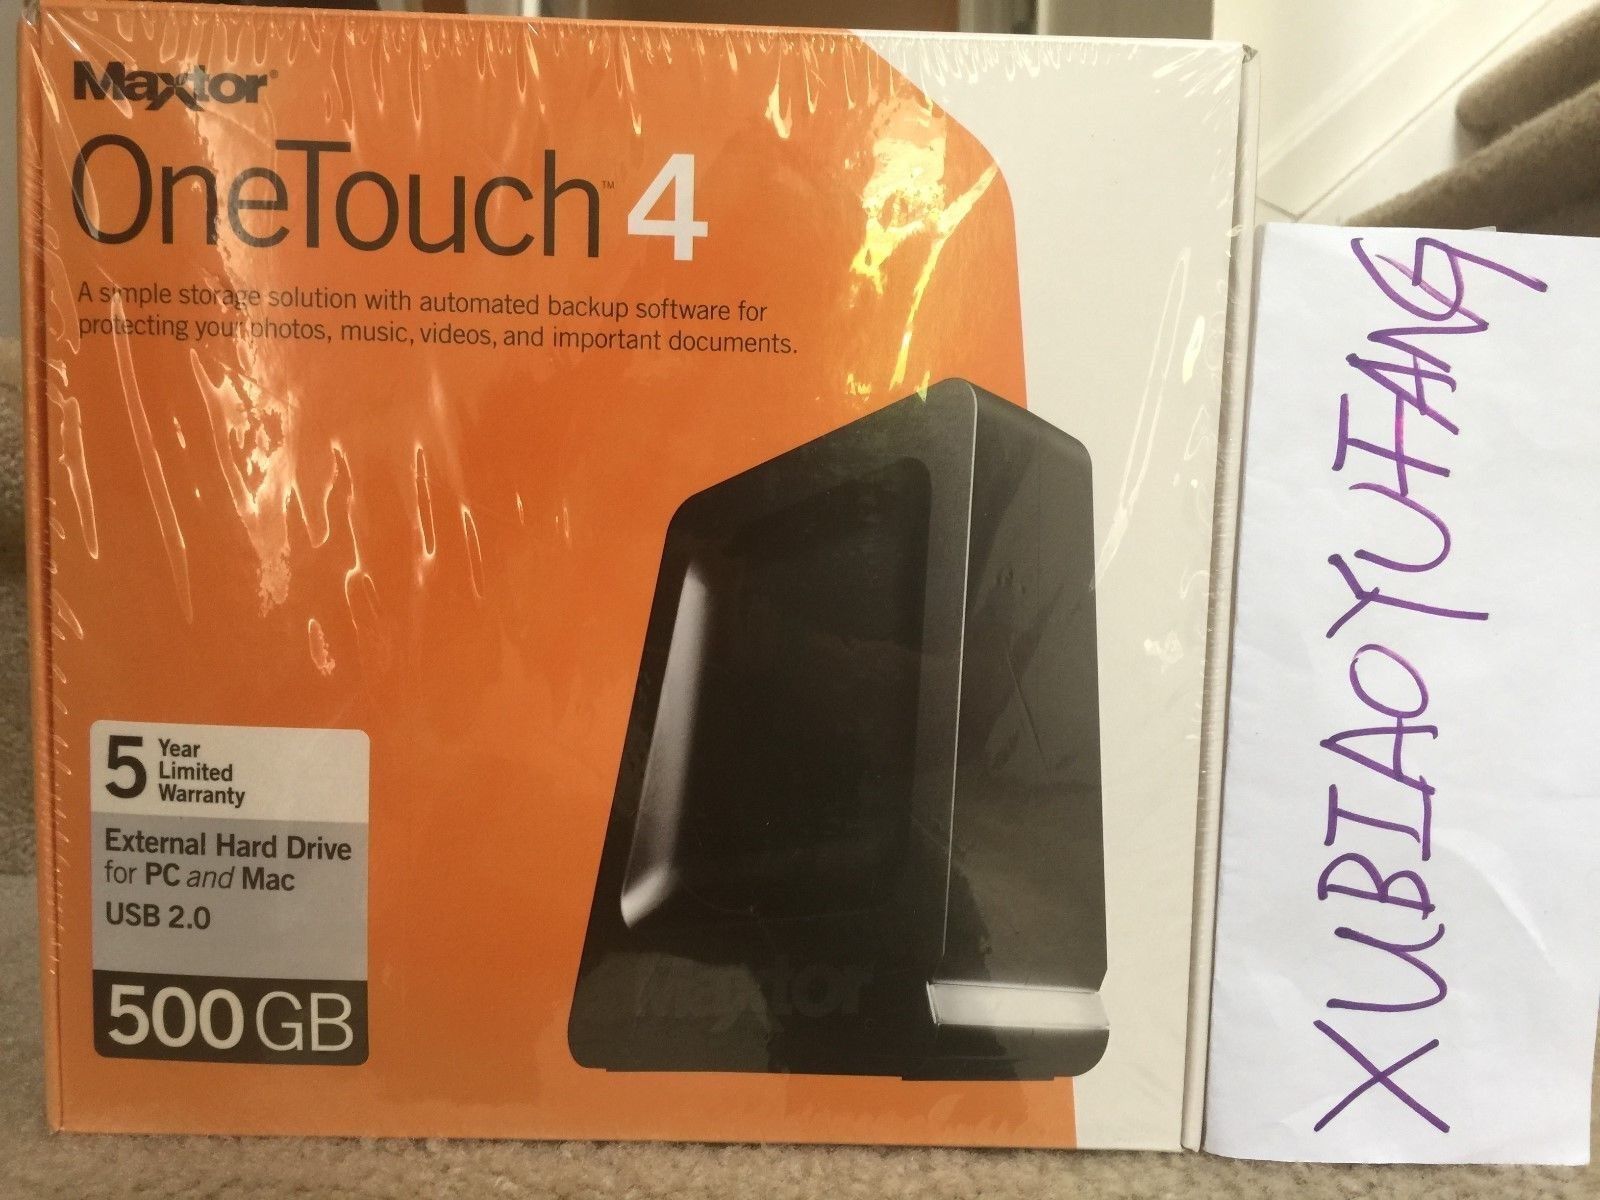 NEW & SEALED Maxtor OneTouch 4 500GB USB 2.0 External Hard Drive For Pc Or Mac